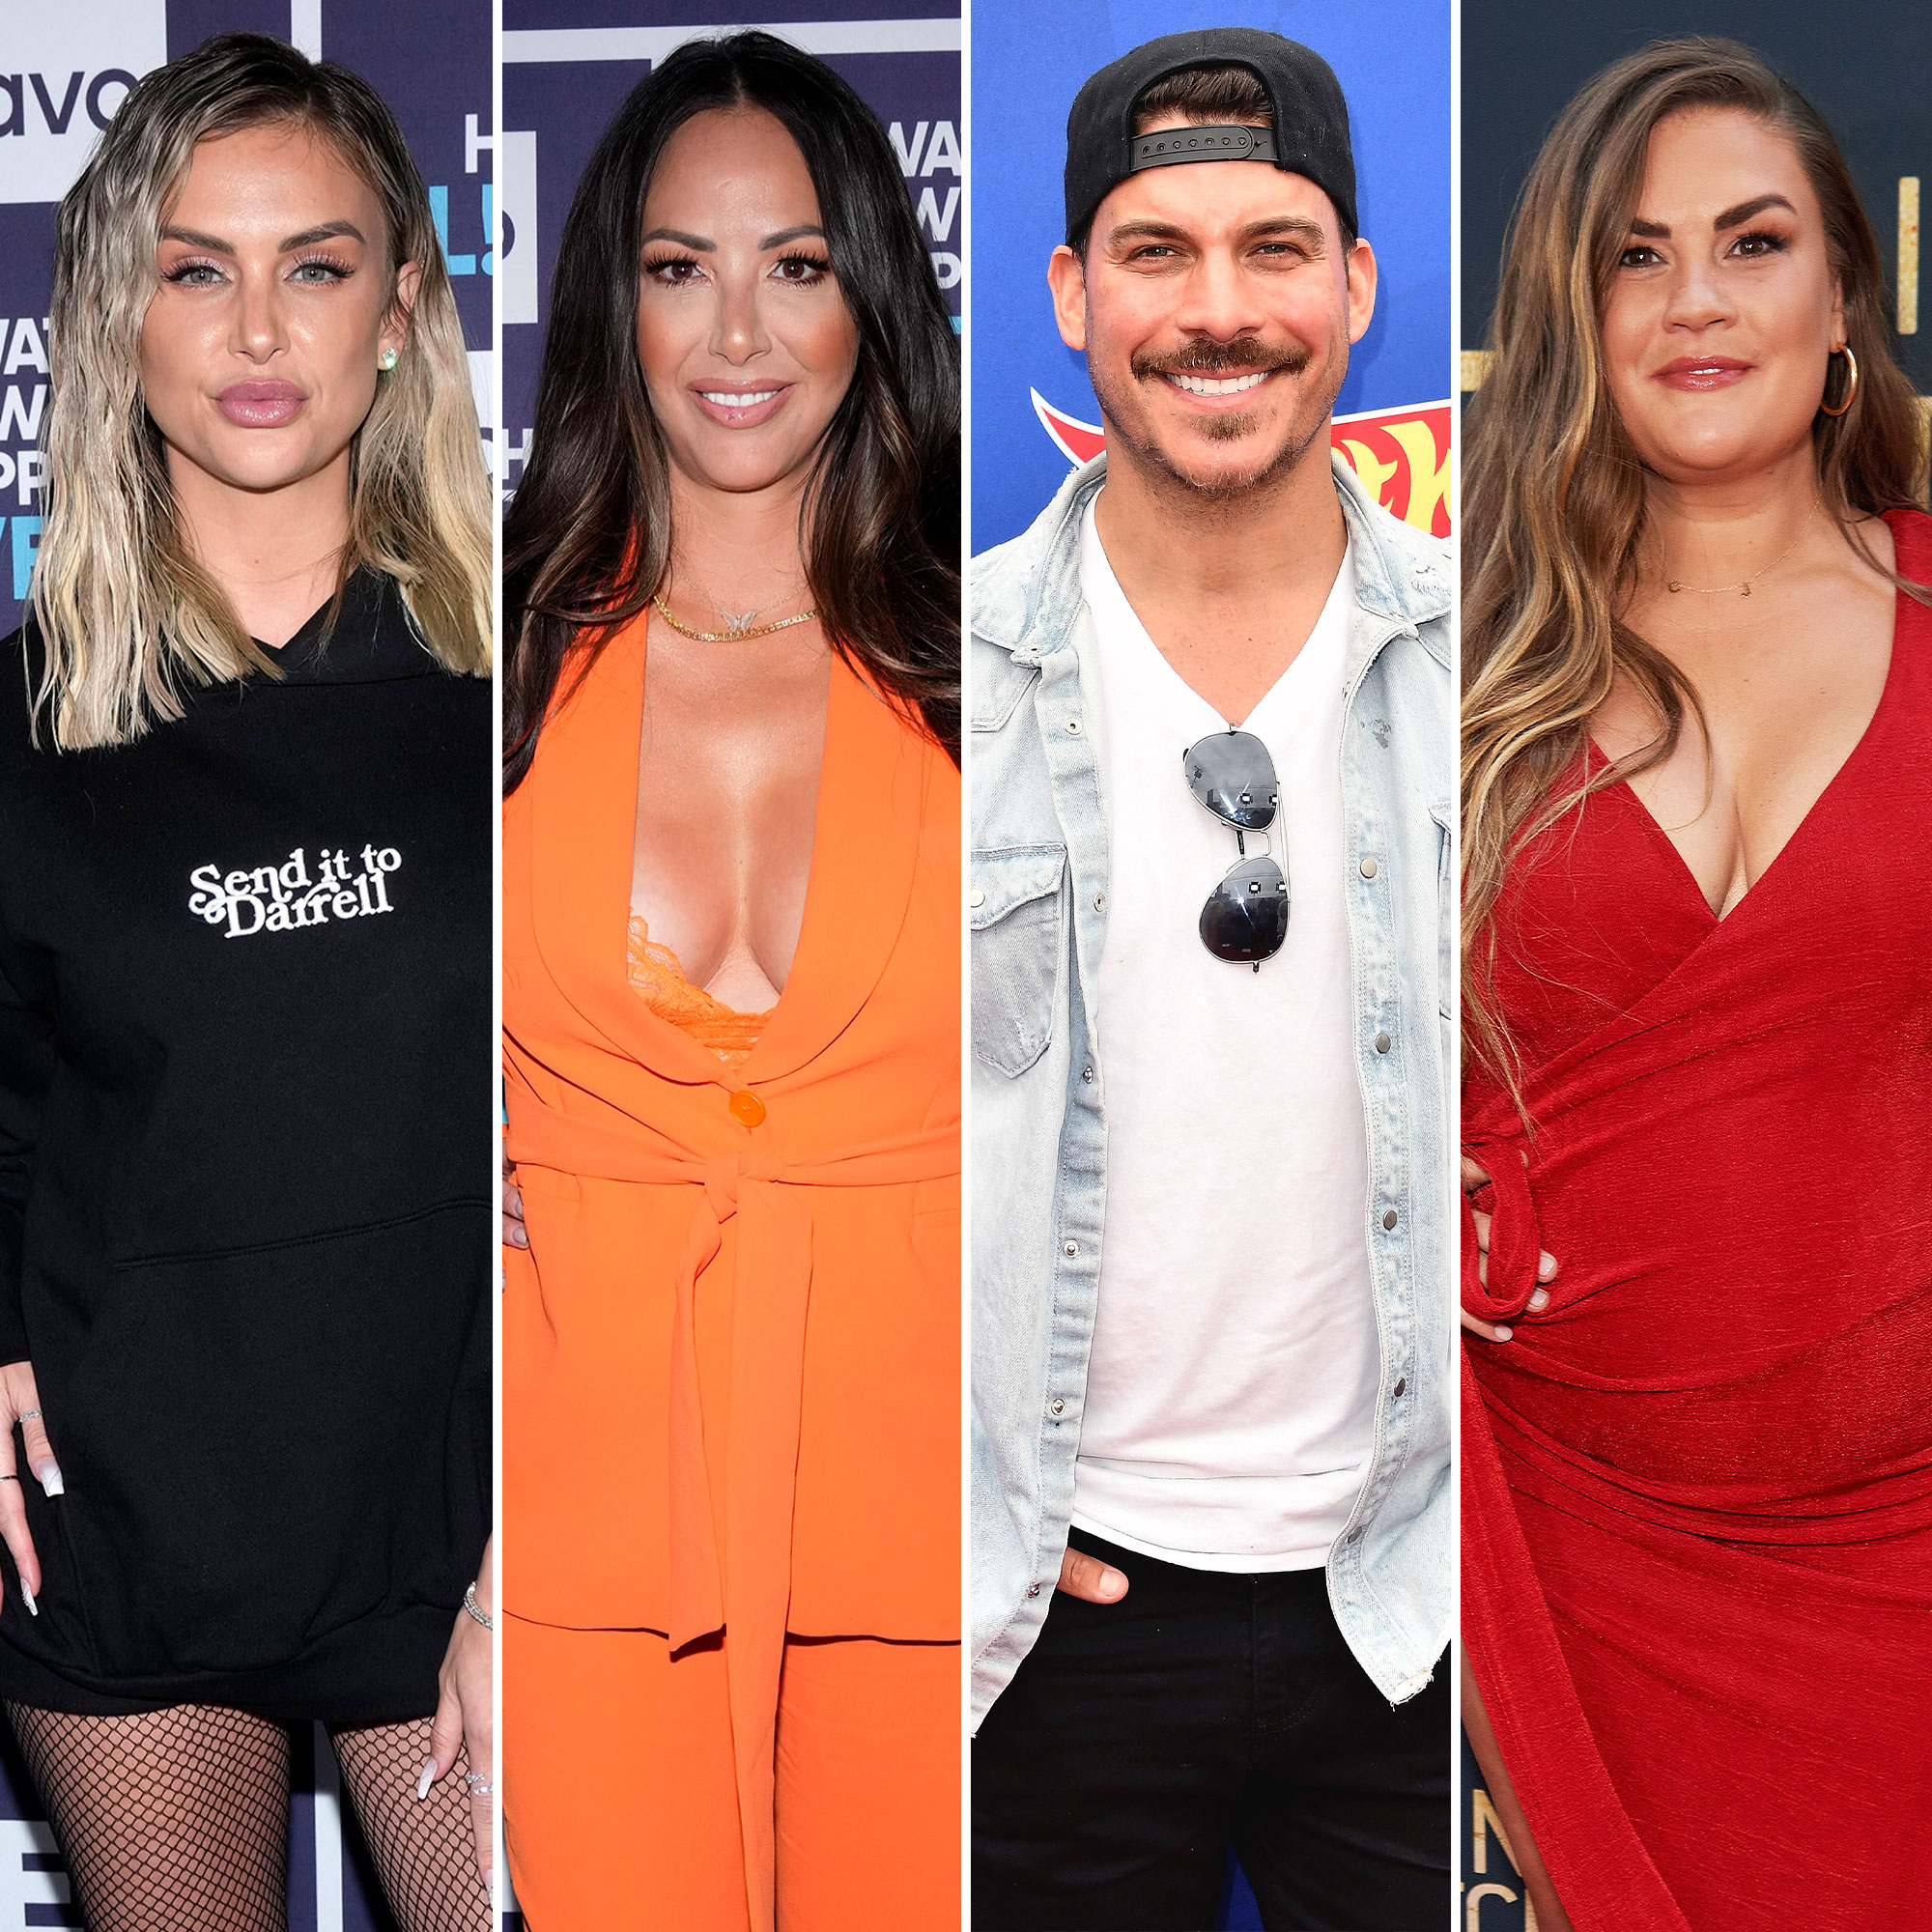 Lala Kent Says Kristen, Jax and Brittany Are Starting to Film New Show